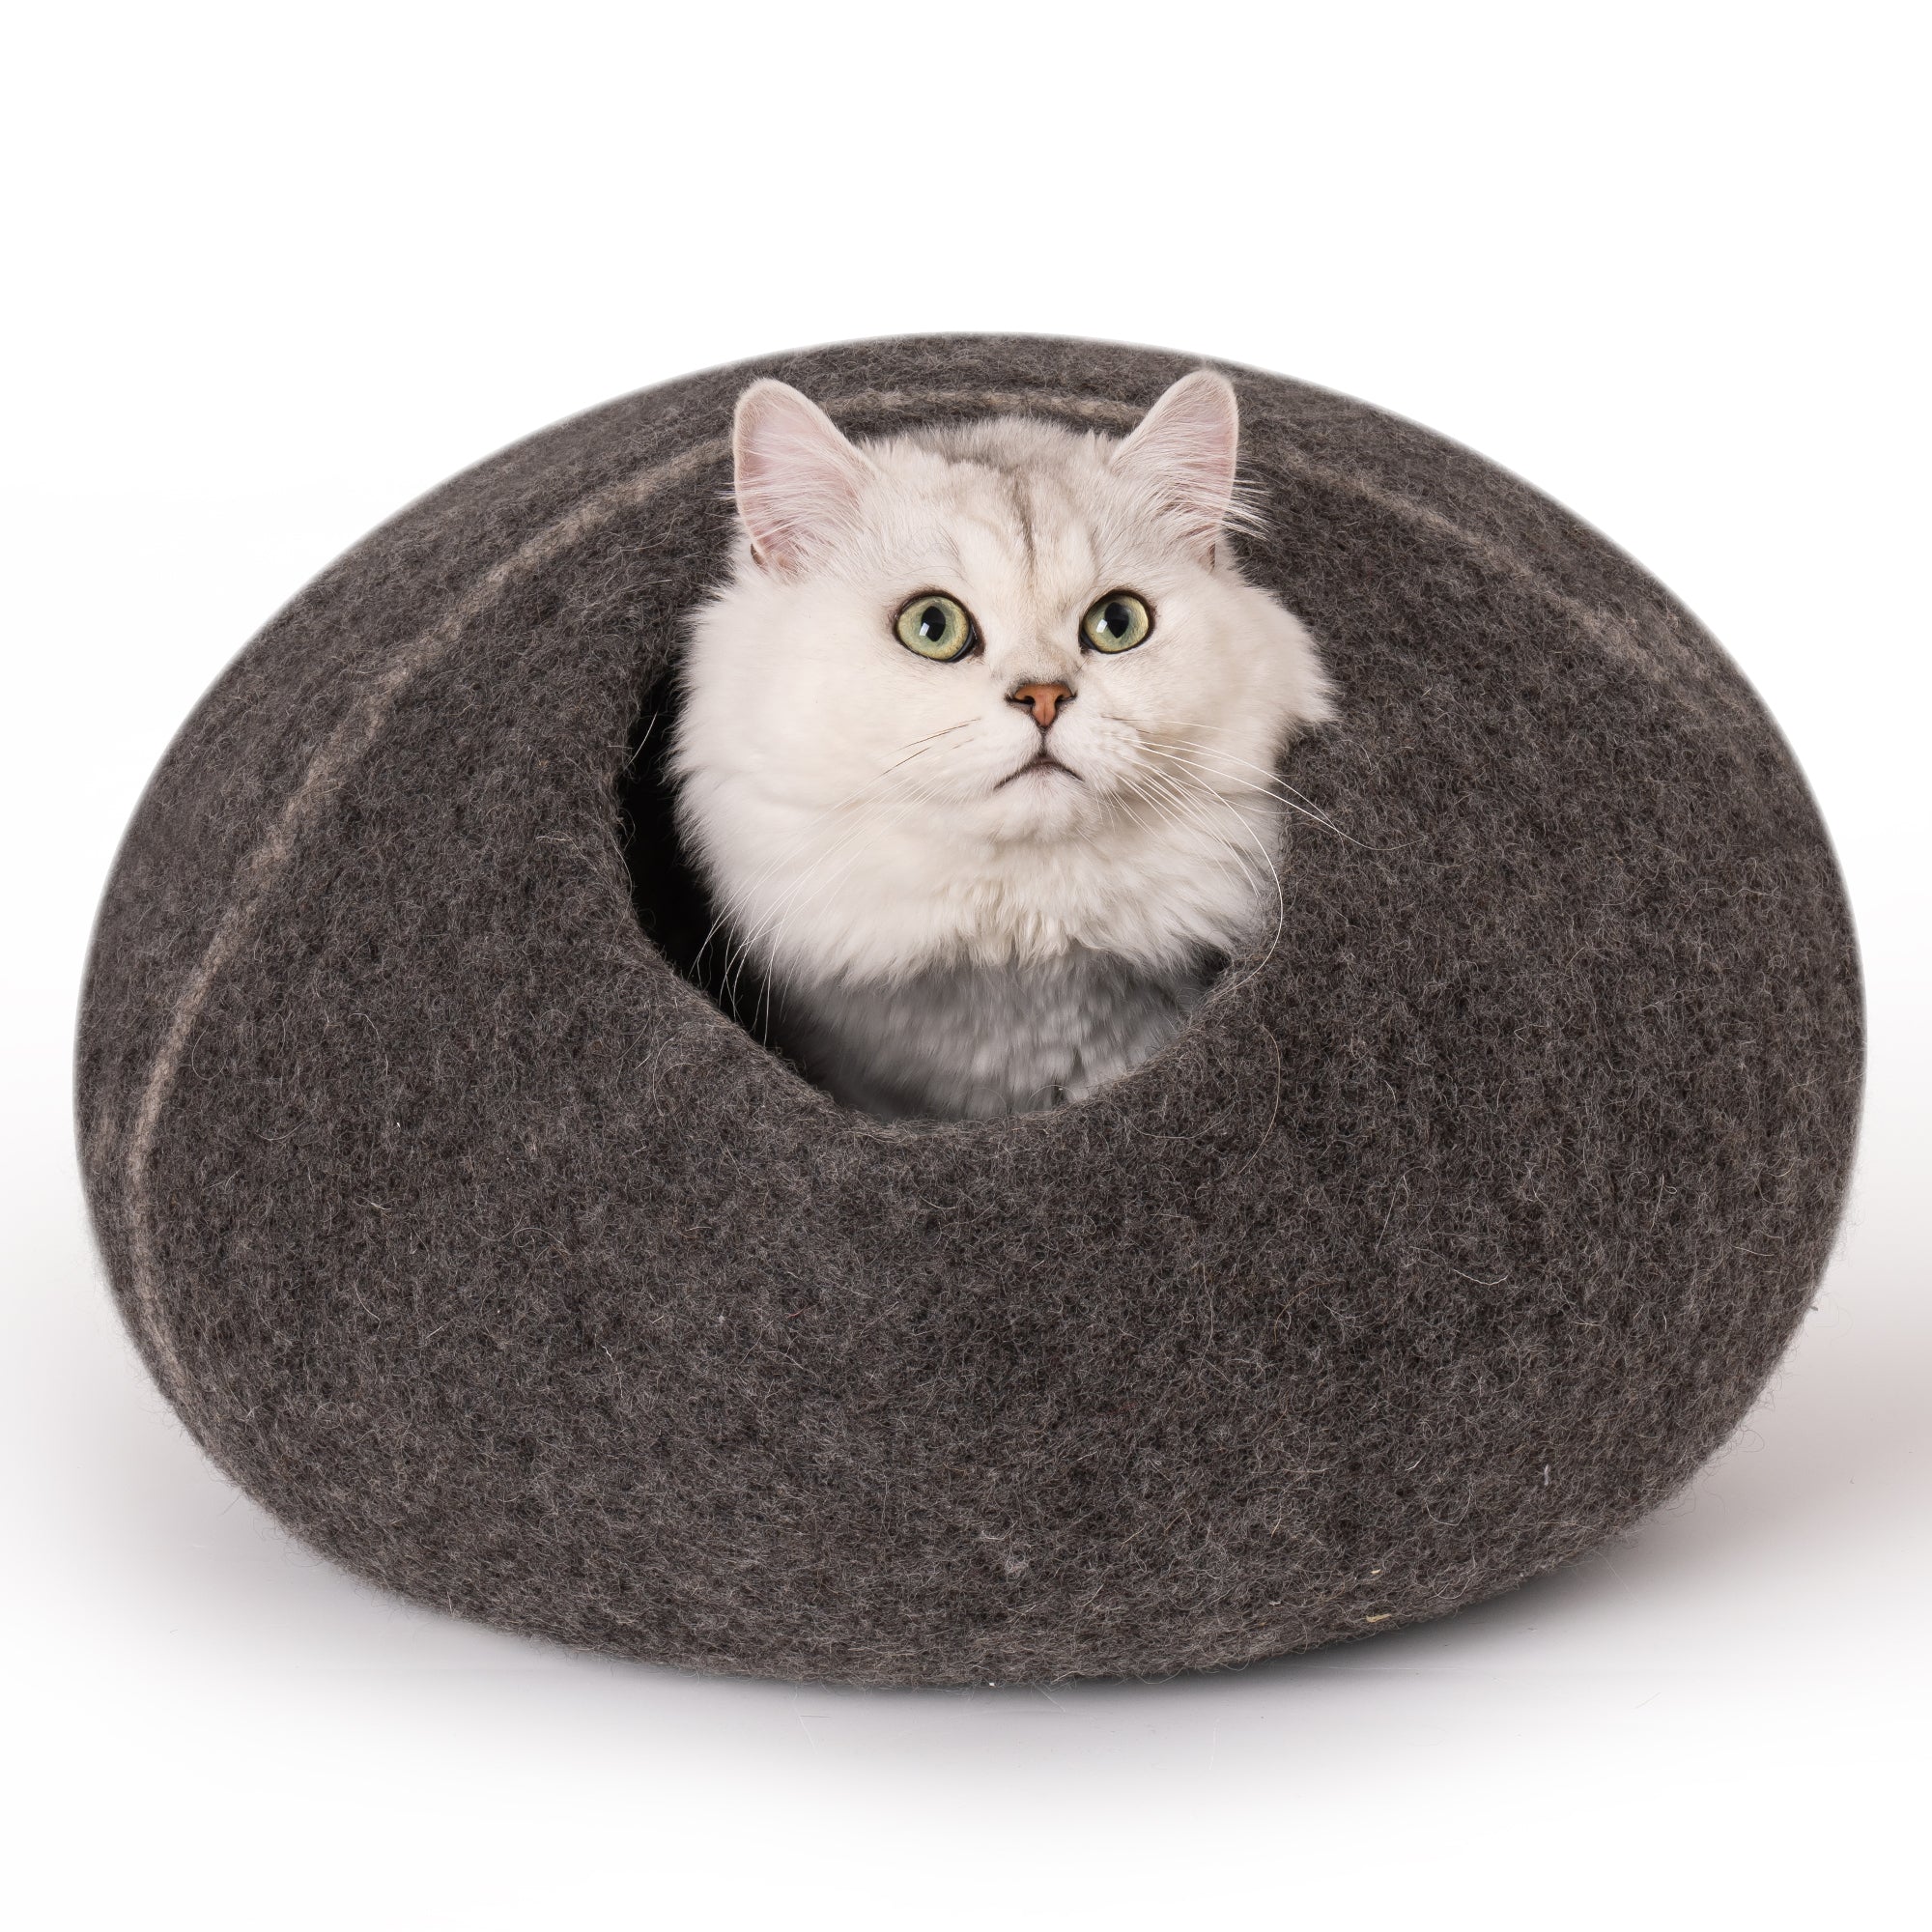 Cat Cave Bed Handmade Wool Cat Bed Cave with Mouse Toy black+ gray-wool